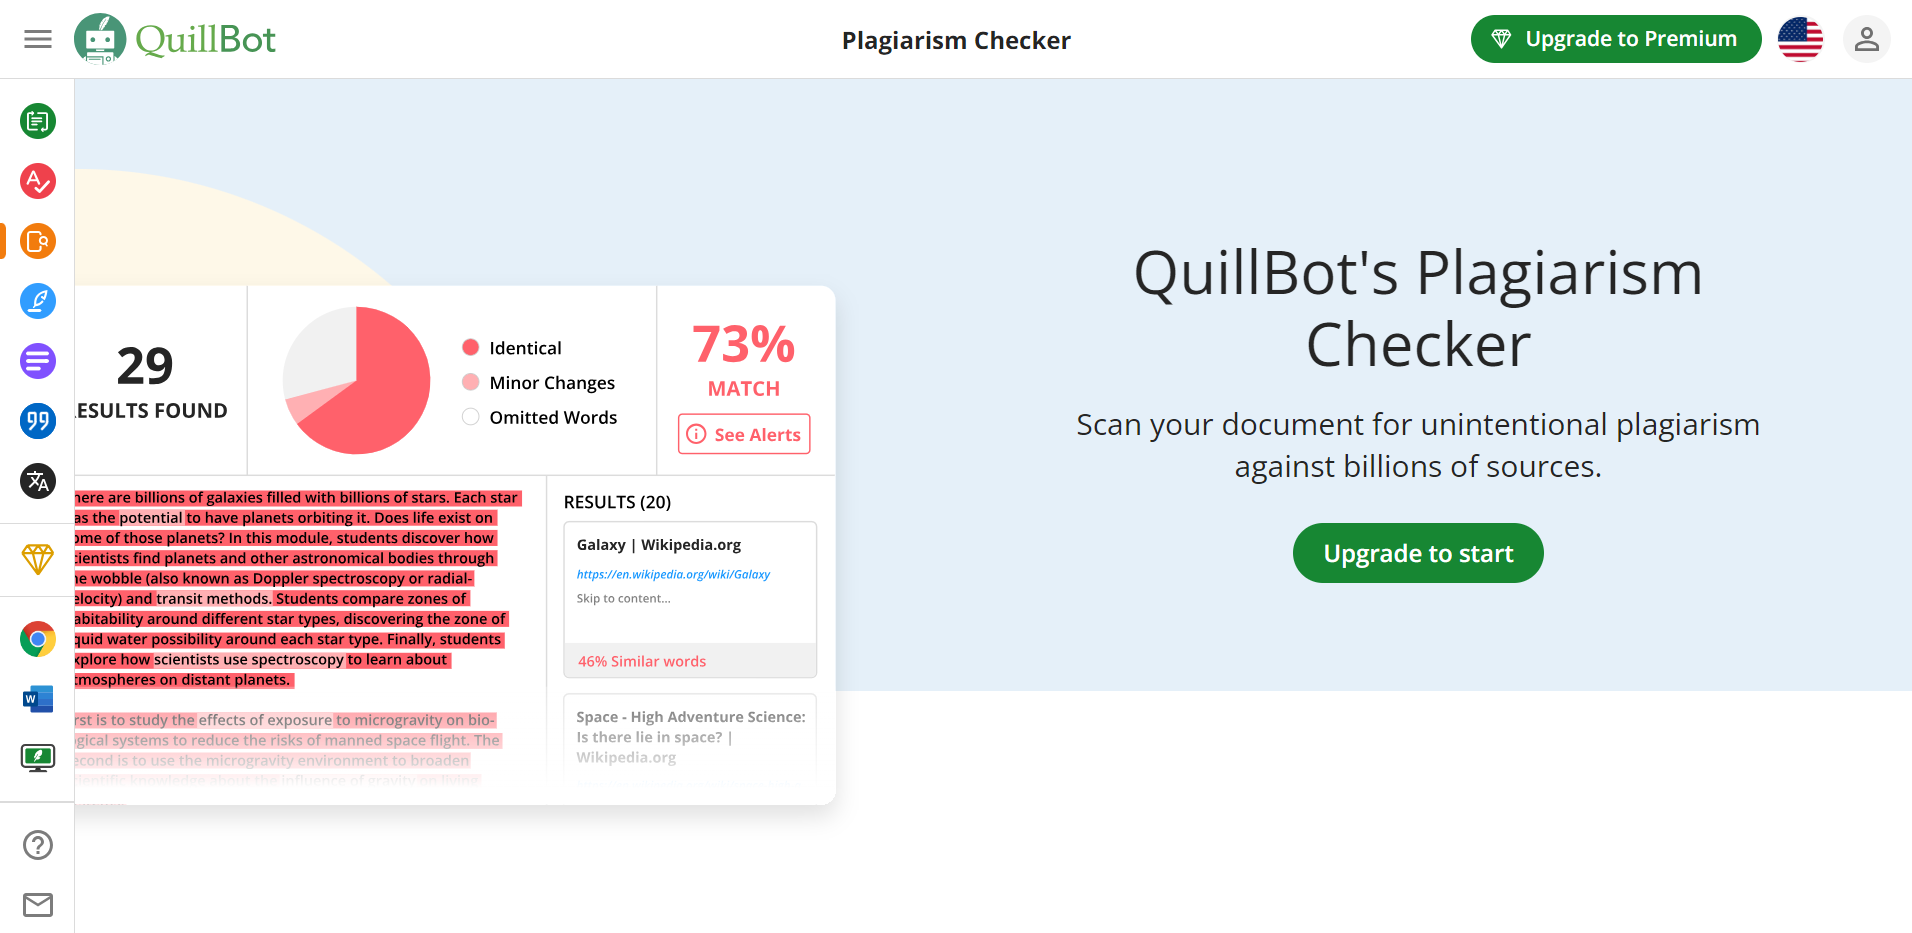 Plagiarism Check Precision: Assessing the Quality of QuillBot’s Checker